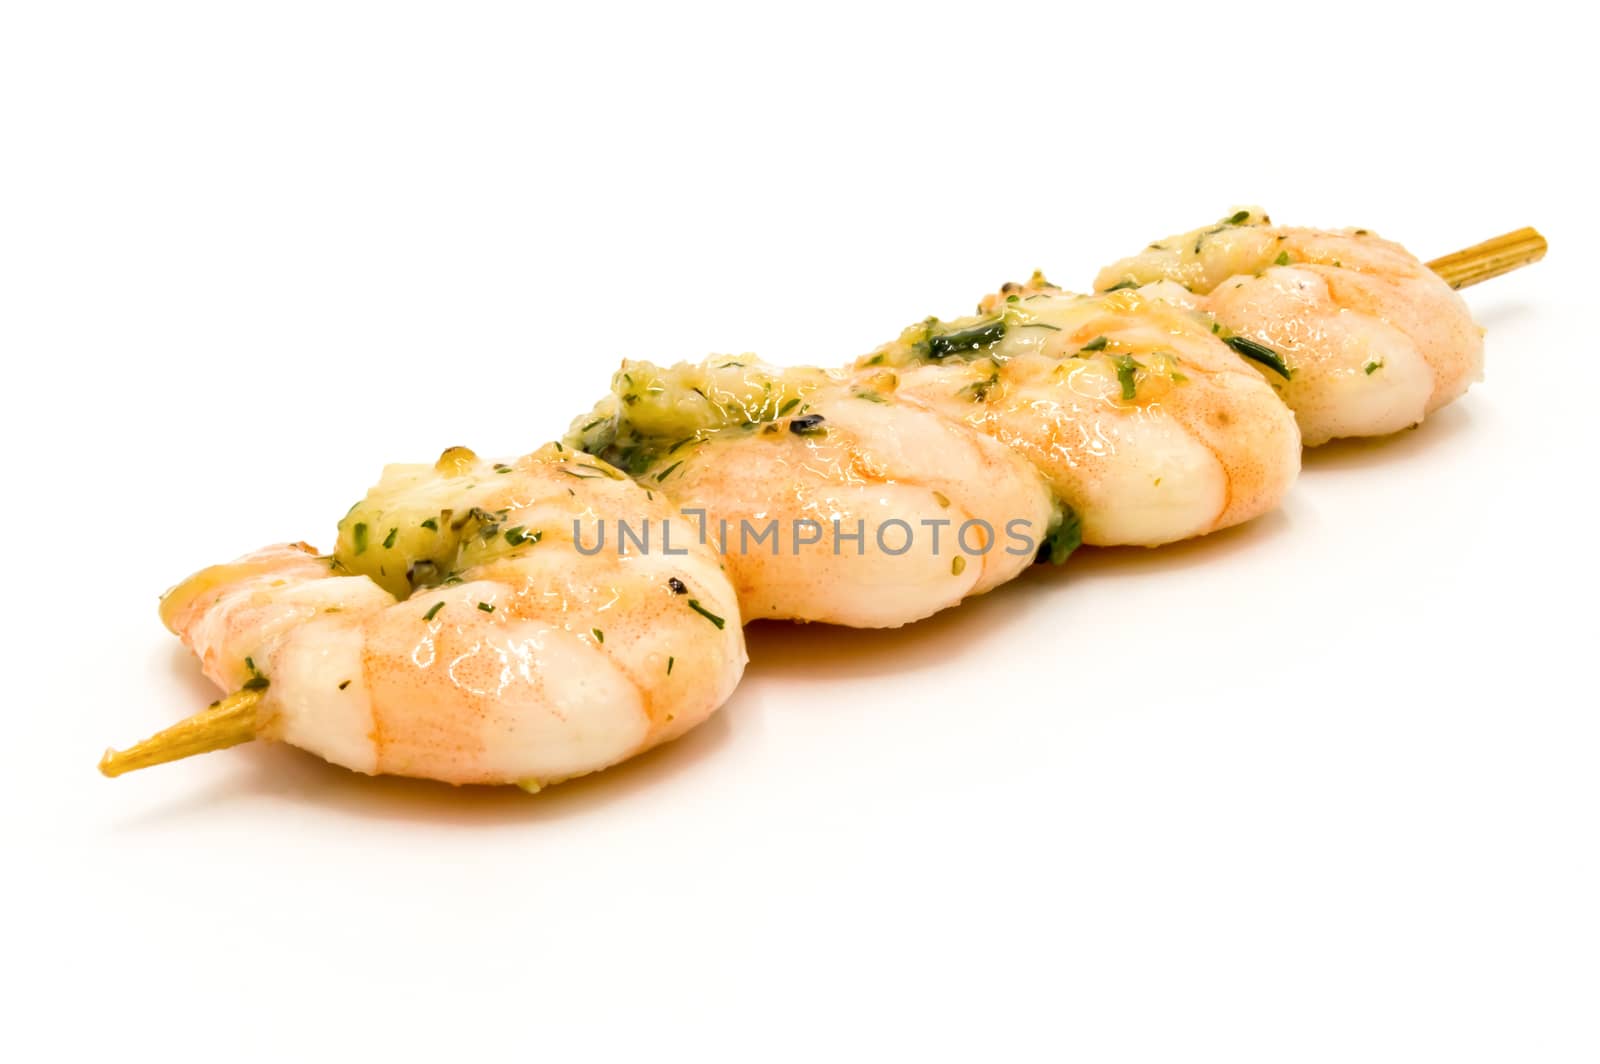 BBQ shrimp - Shrimp skewers ready to grill on a white plate / bottom.